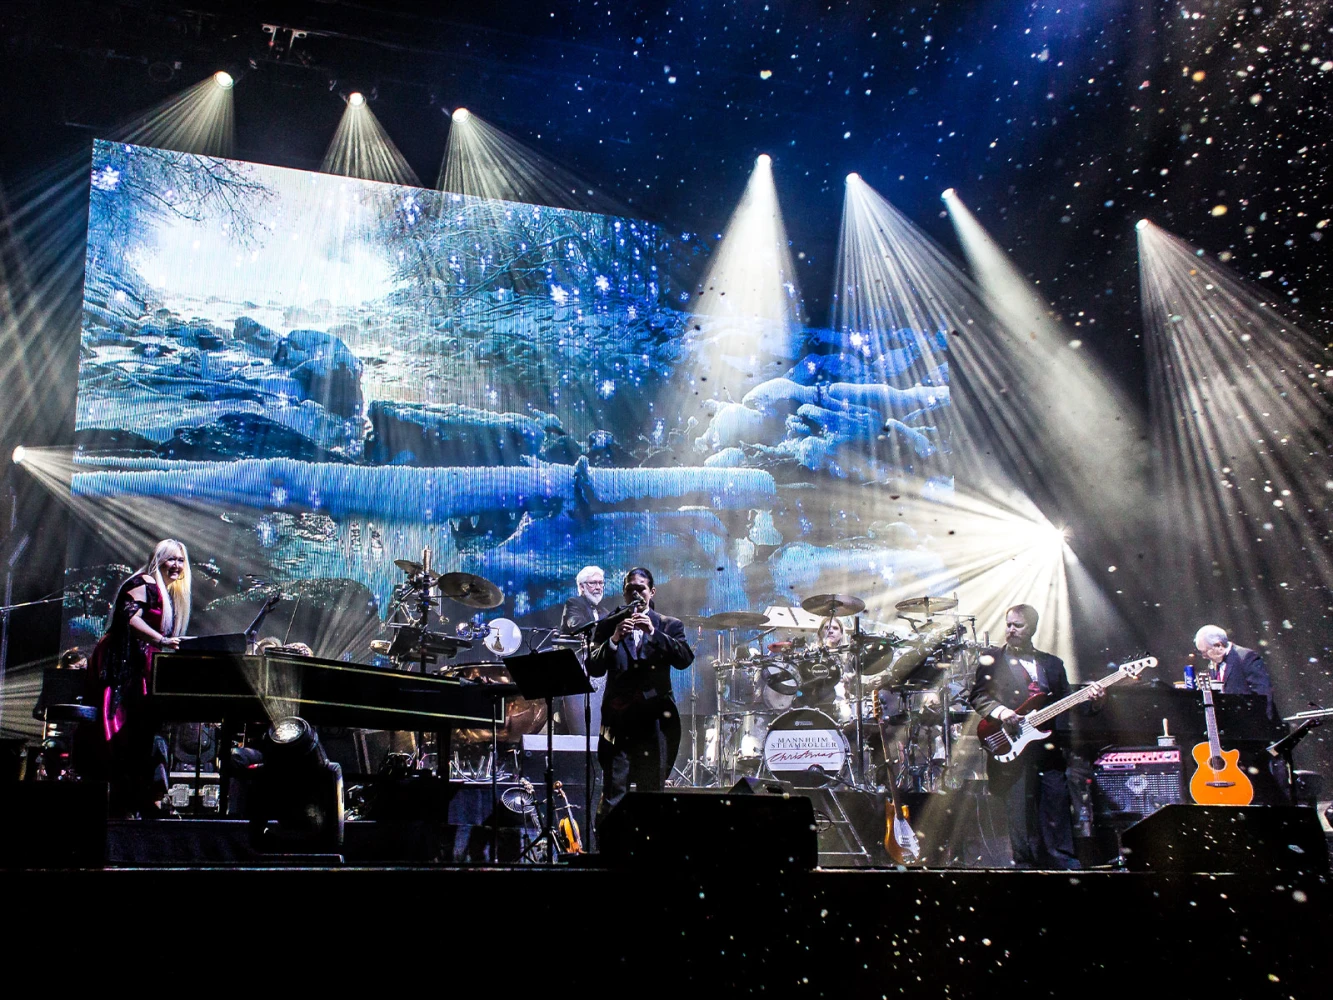 MANNHEIM STEAMROLLER CHRISTMAS BY CHIP DAVIS: What to expect - 2